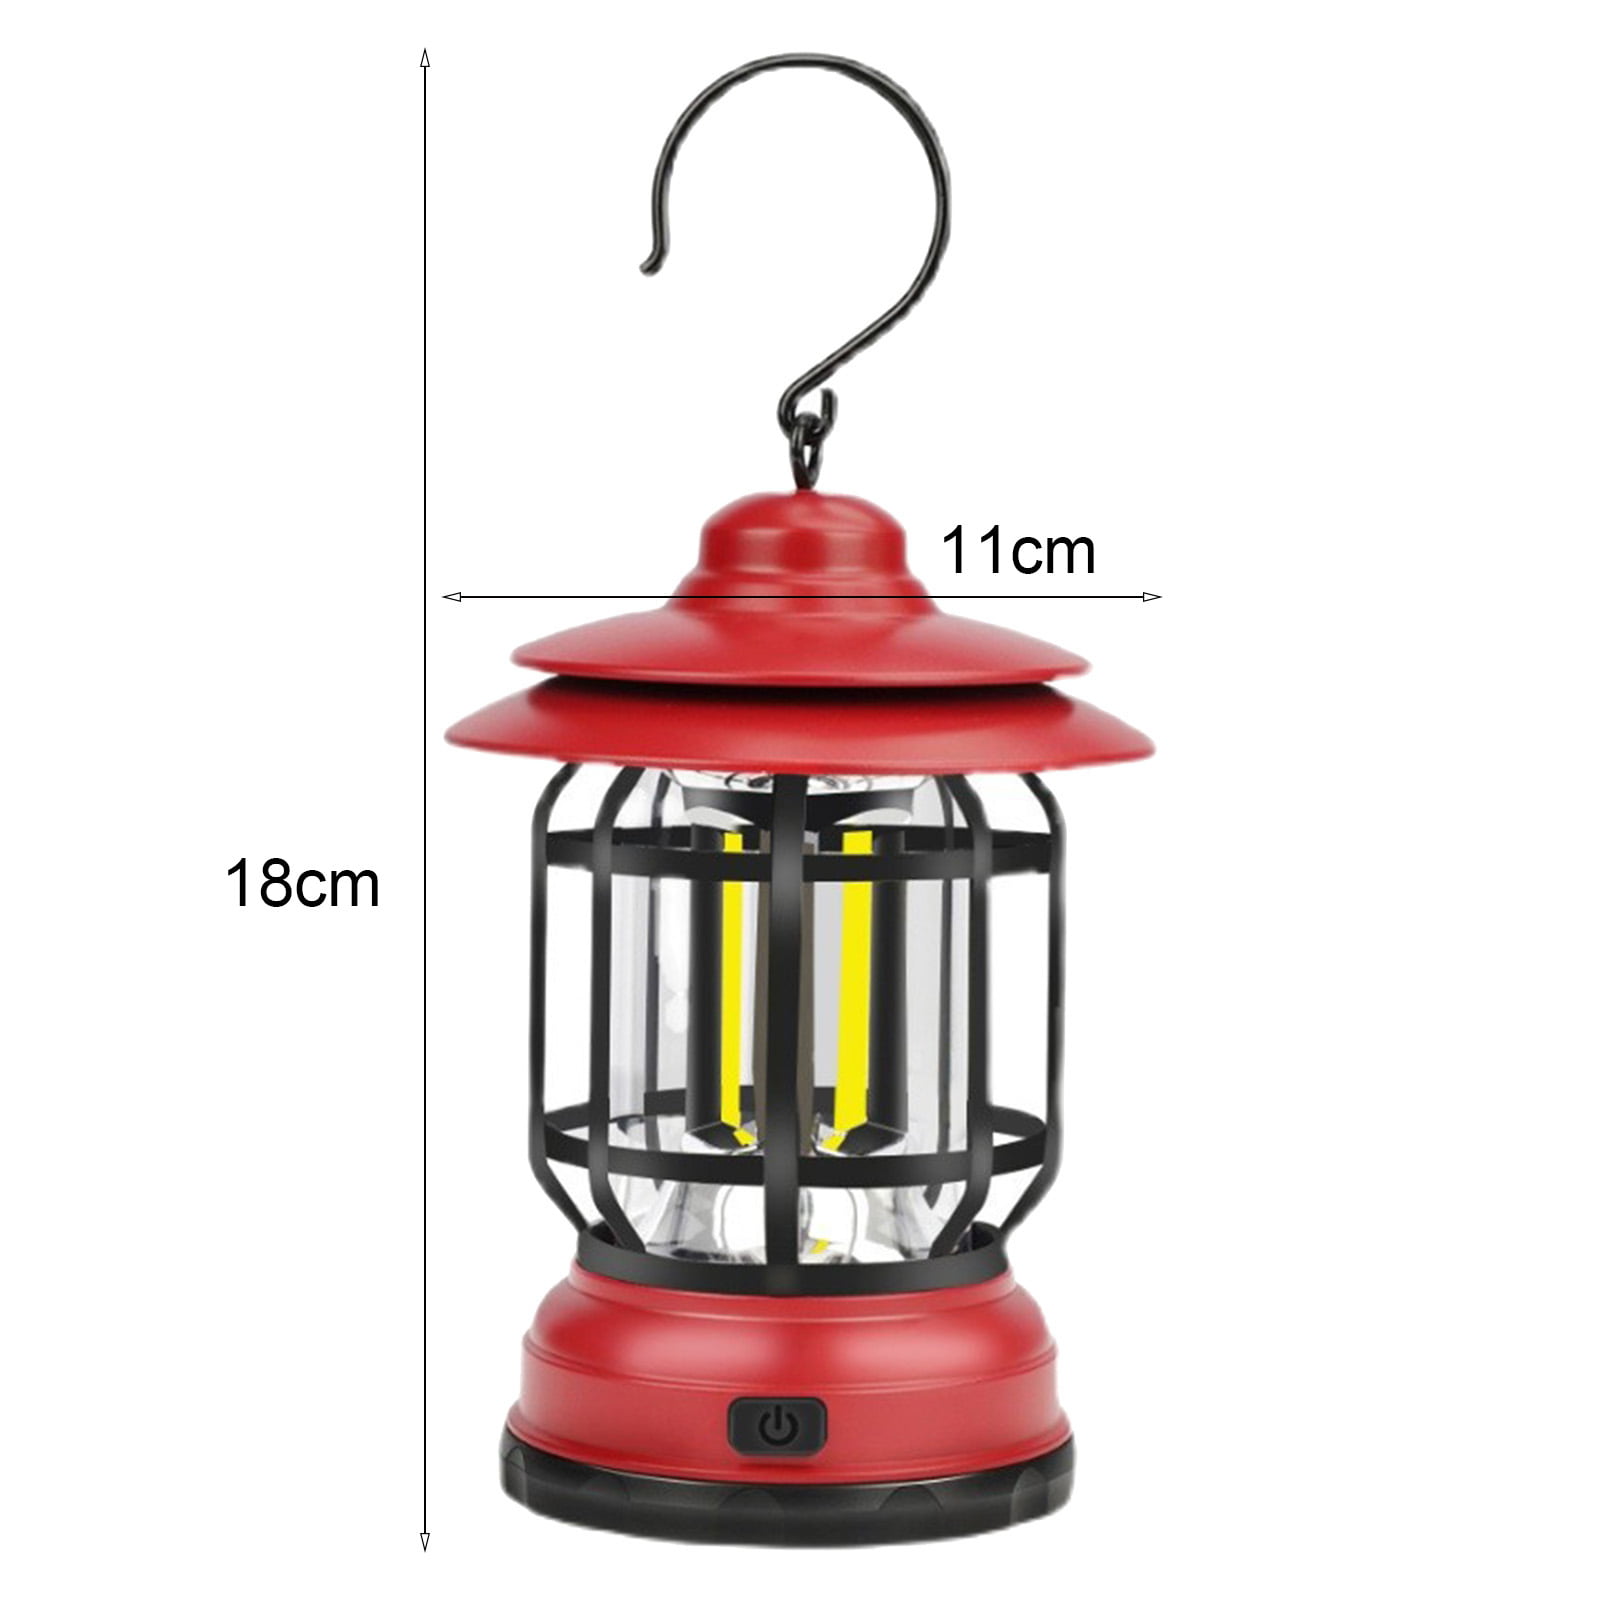 LED Camping Lantern, 6000mAh Rechargeable Battery Camping Light, IP55  Waterproof Outdoor Table Lamp, 4-Way Dimmable Portable Lamp